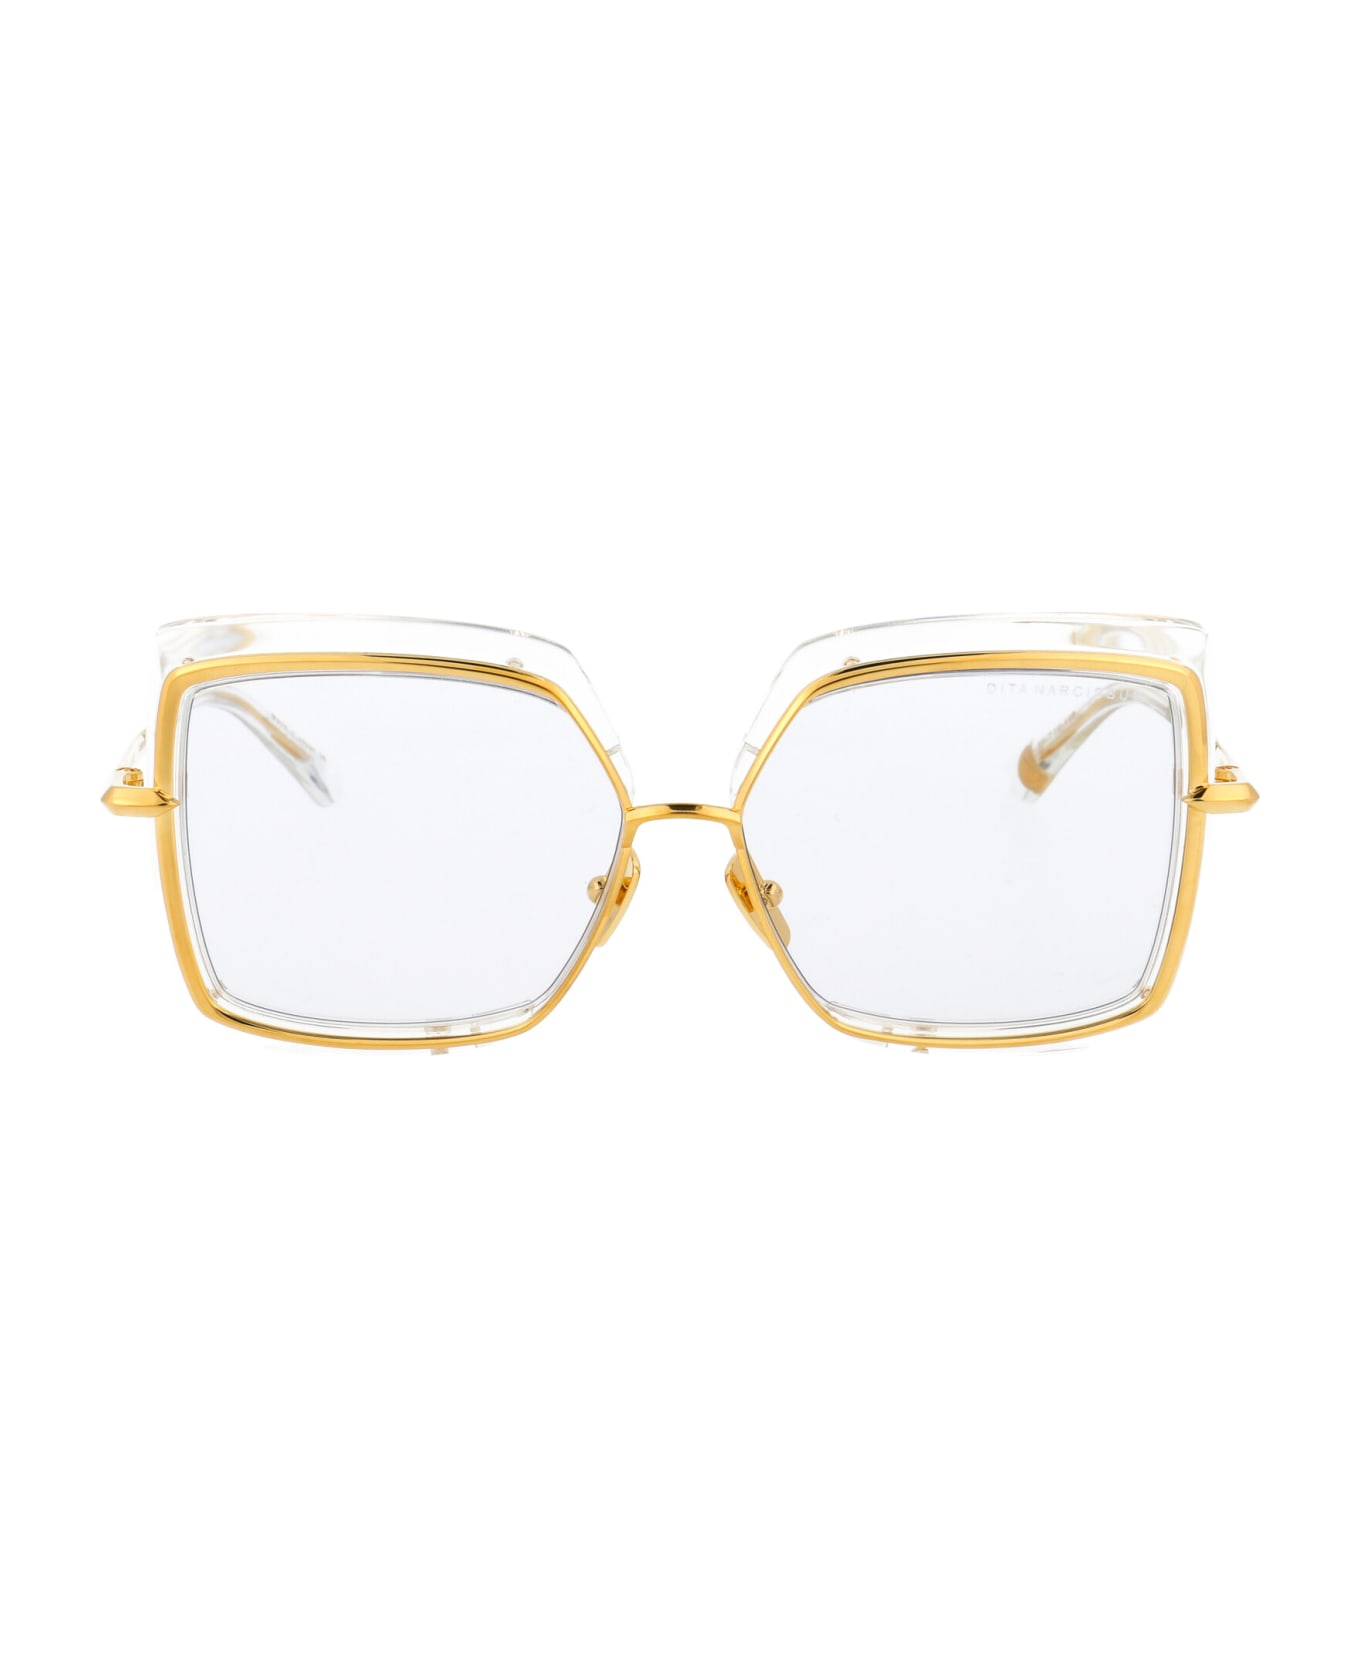 Dita Narcissus Sunglasses - Crystal Clear - Yellow Gold